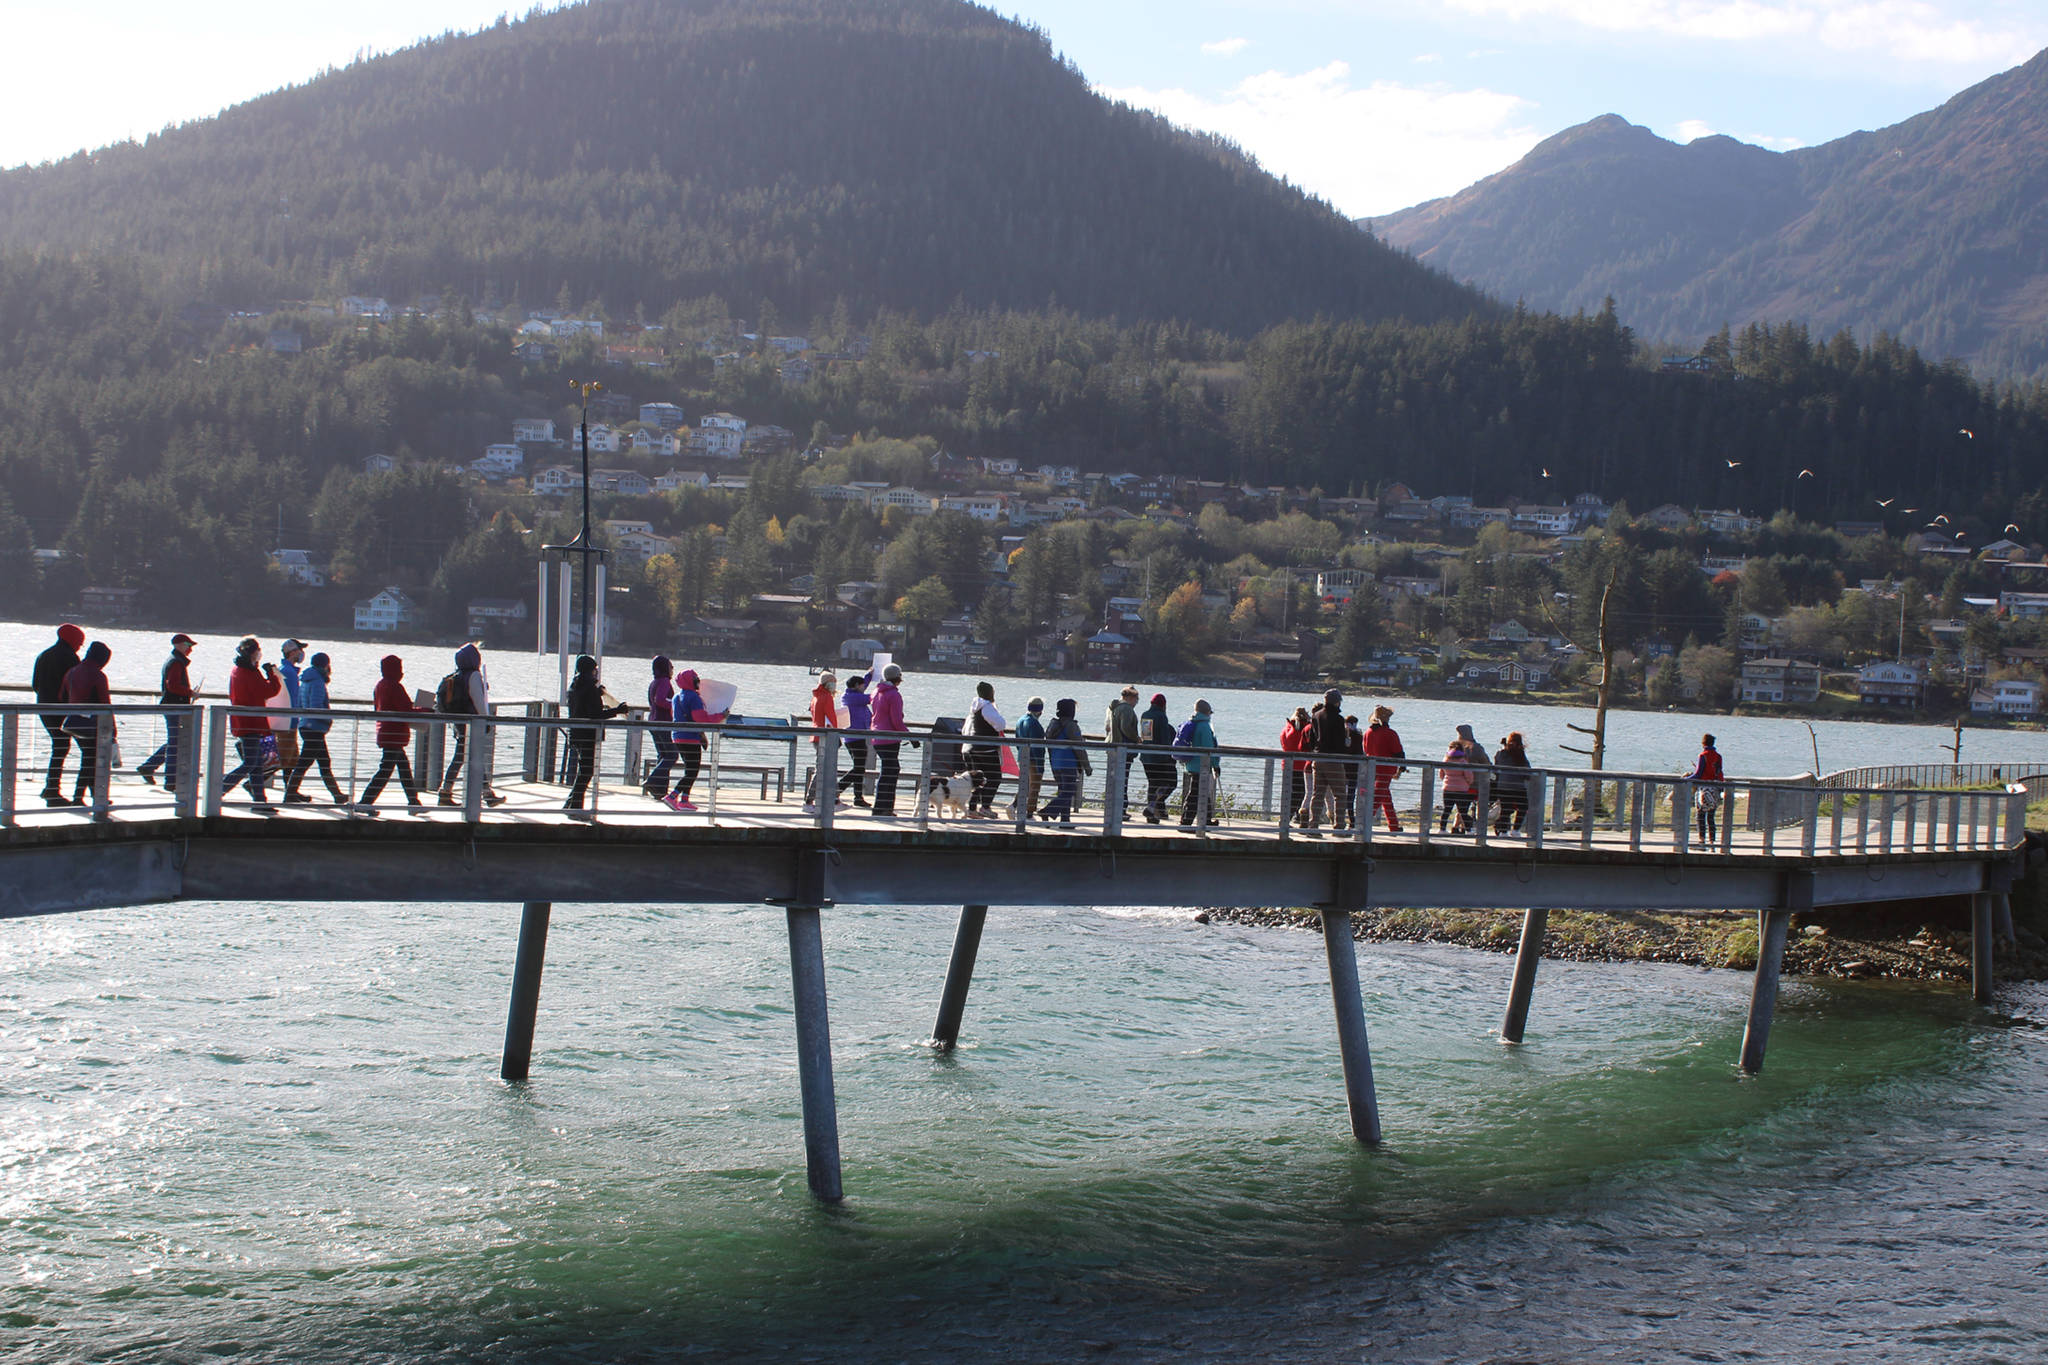 Rather than walk on the sidewalk the whole way to Mayor Bill Overstreet Park, participants in Saturday’s women’s march walked some of the way their via the Seawalk. (Ben Hohenstatt Juneau Empire)